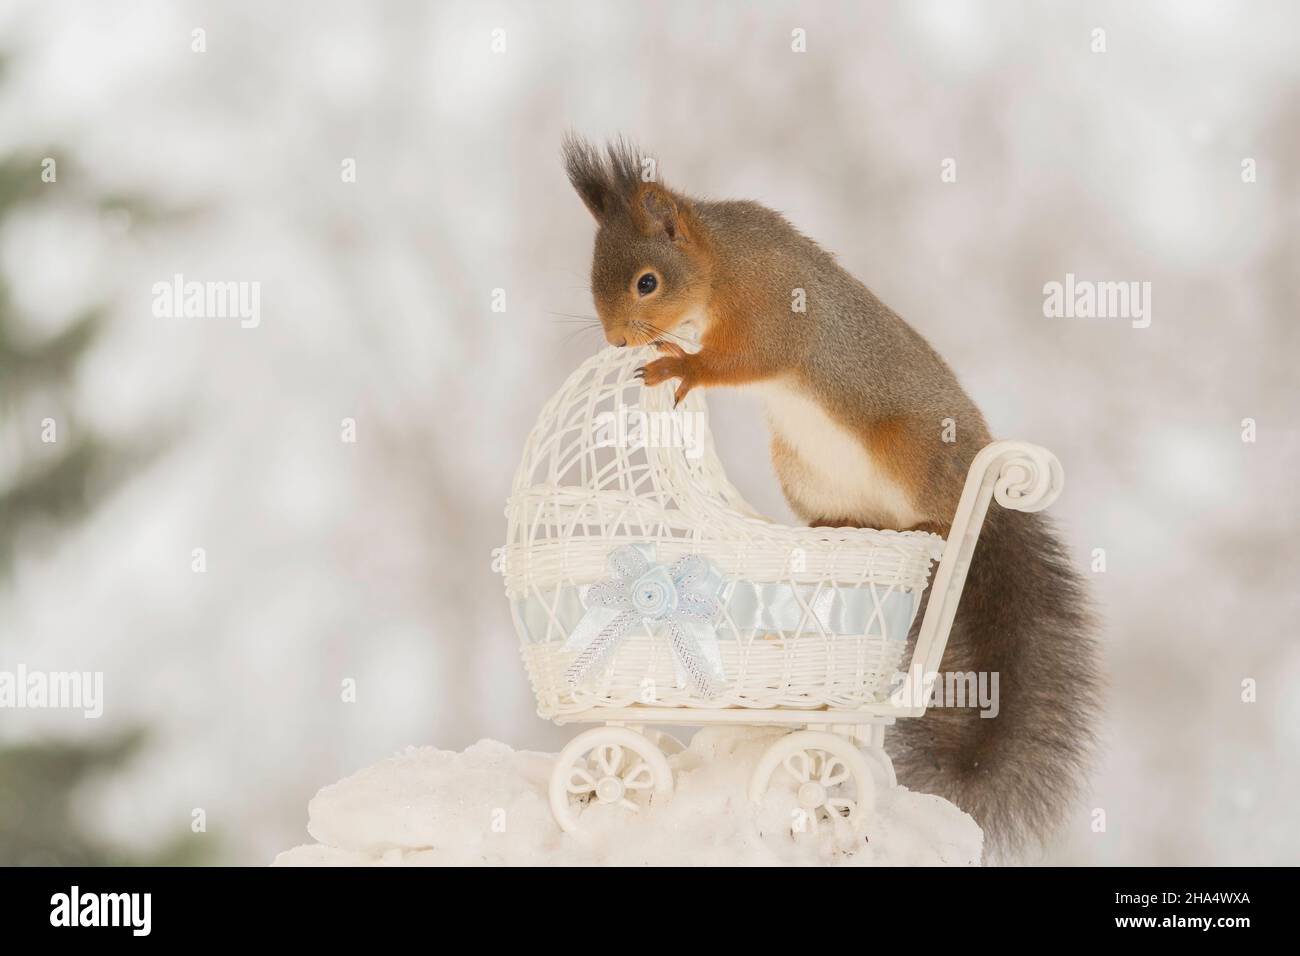 close up of red squirrel on snow with a stroller Stock Photo